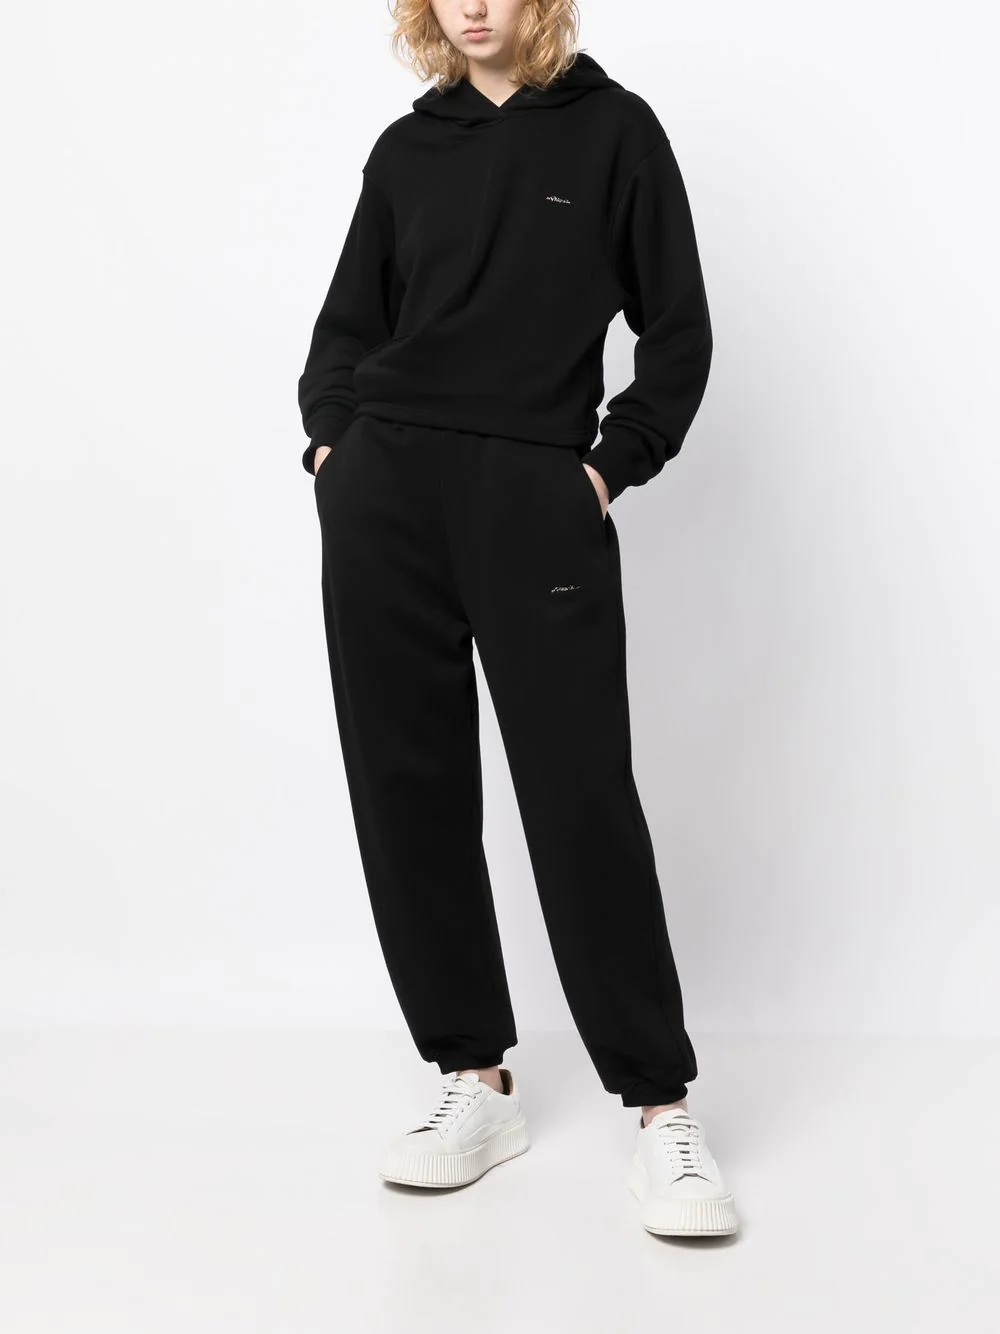 3.1-PhillipLim-Compact-French-Terry-Sweatpants-Black-2